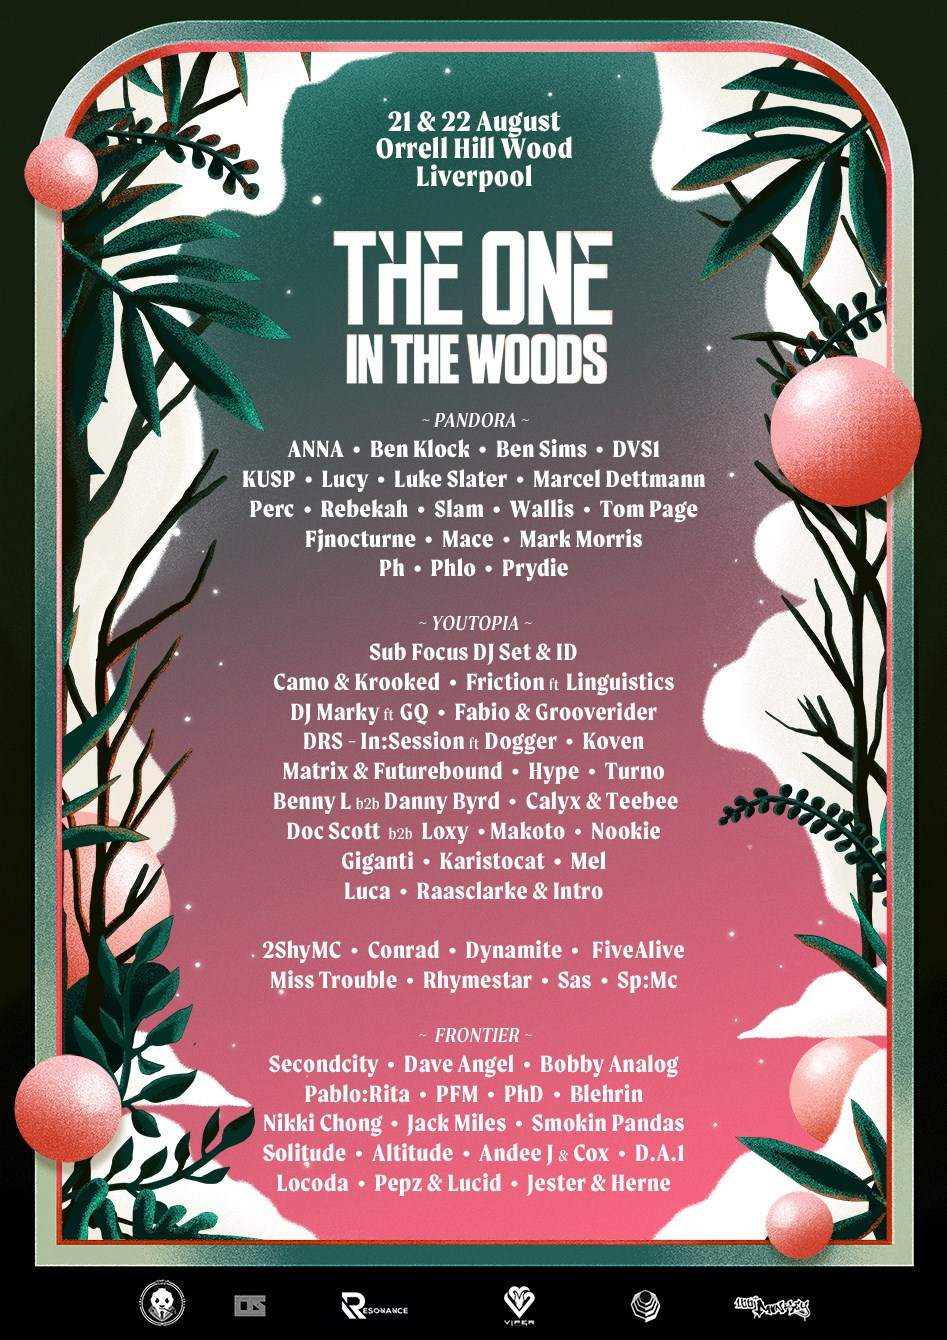 The One In The Woods - Página trasera